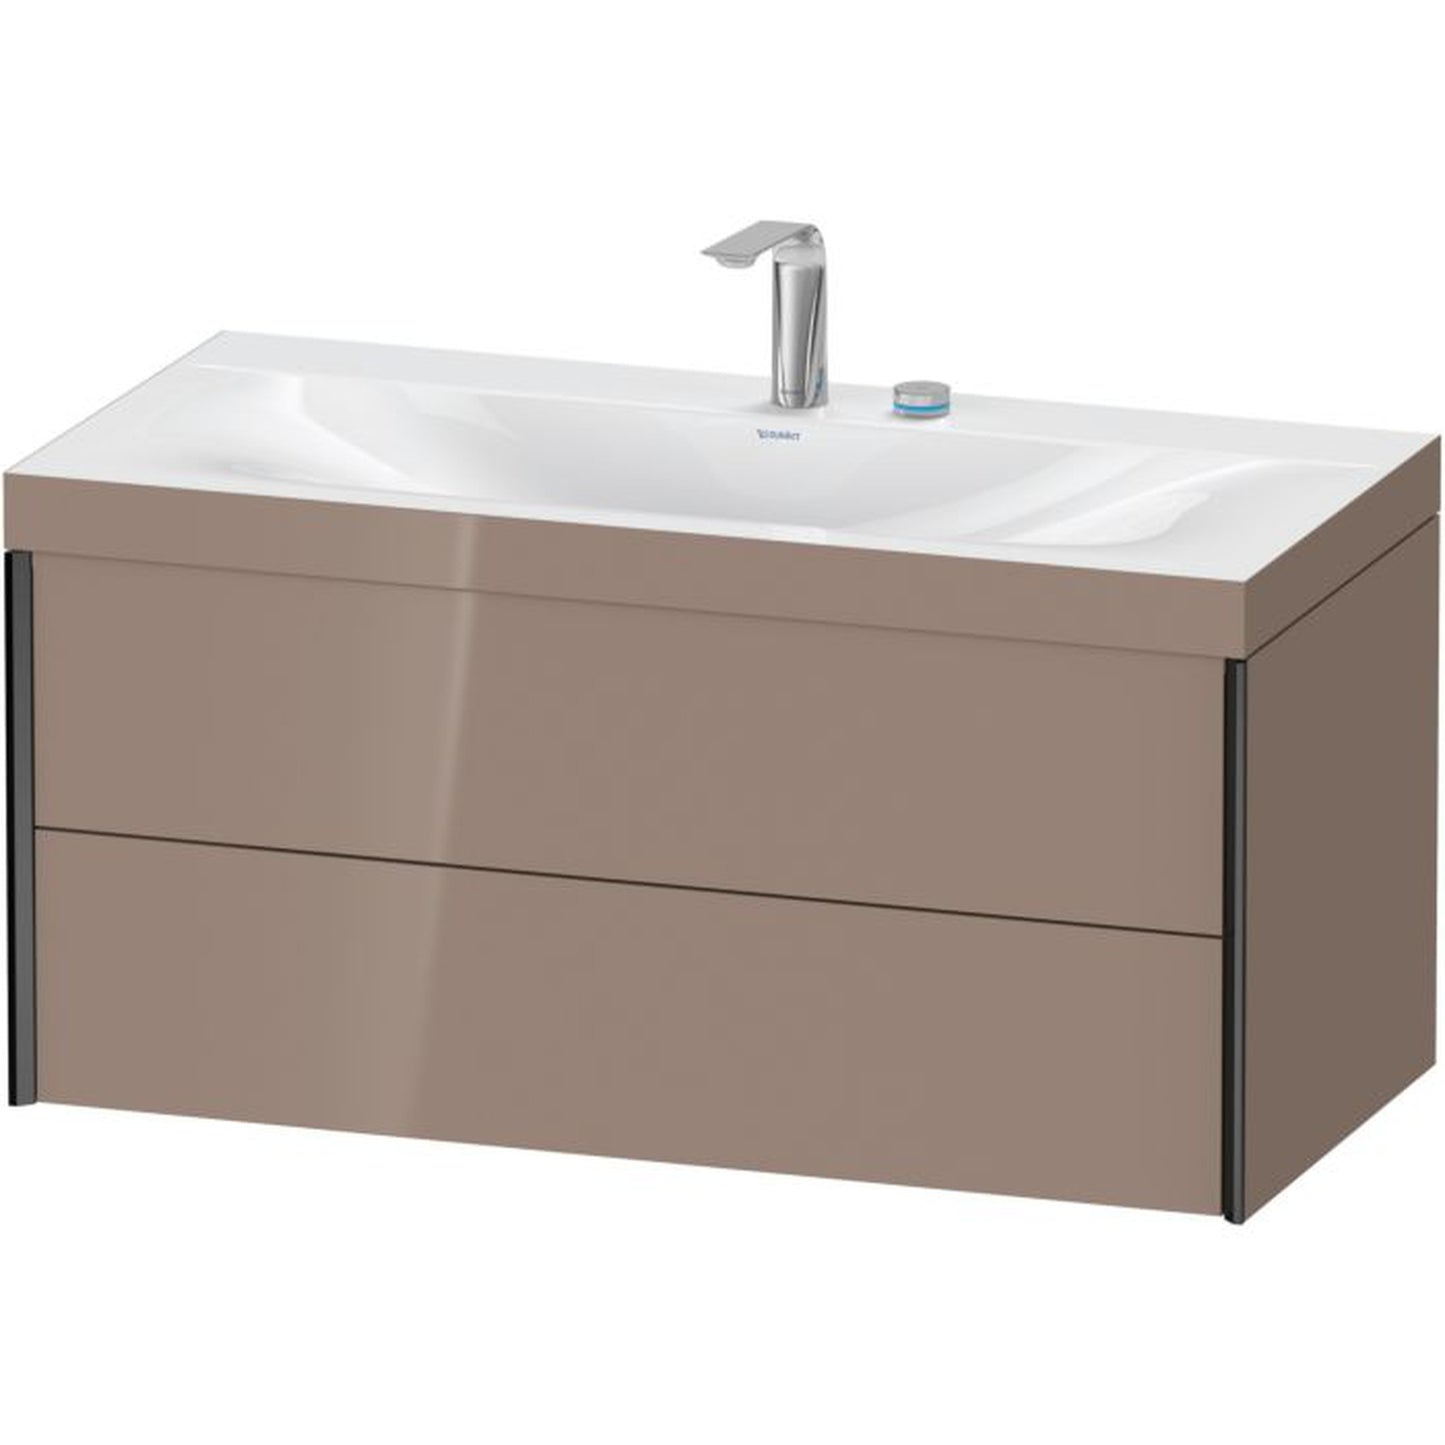 Duravit Xviu 39" x 20" x 19" Two Drawer C-Bonded Wall-Mount Vanity Kit With Two Tap Holes, Cappuccino (XV4616EB286C)